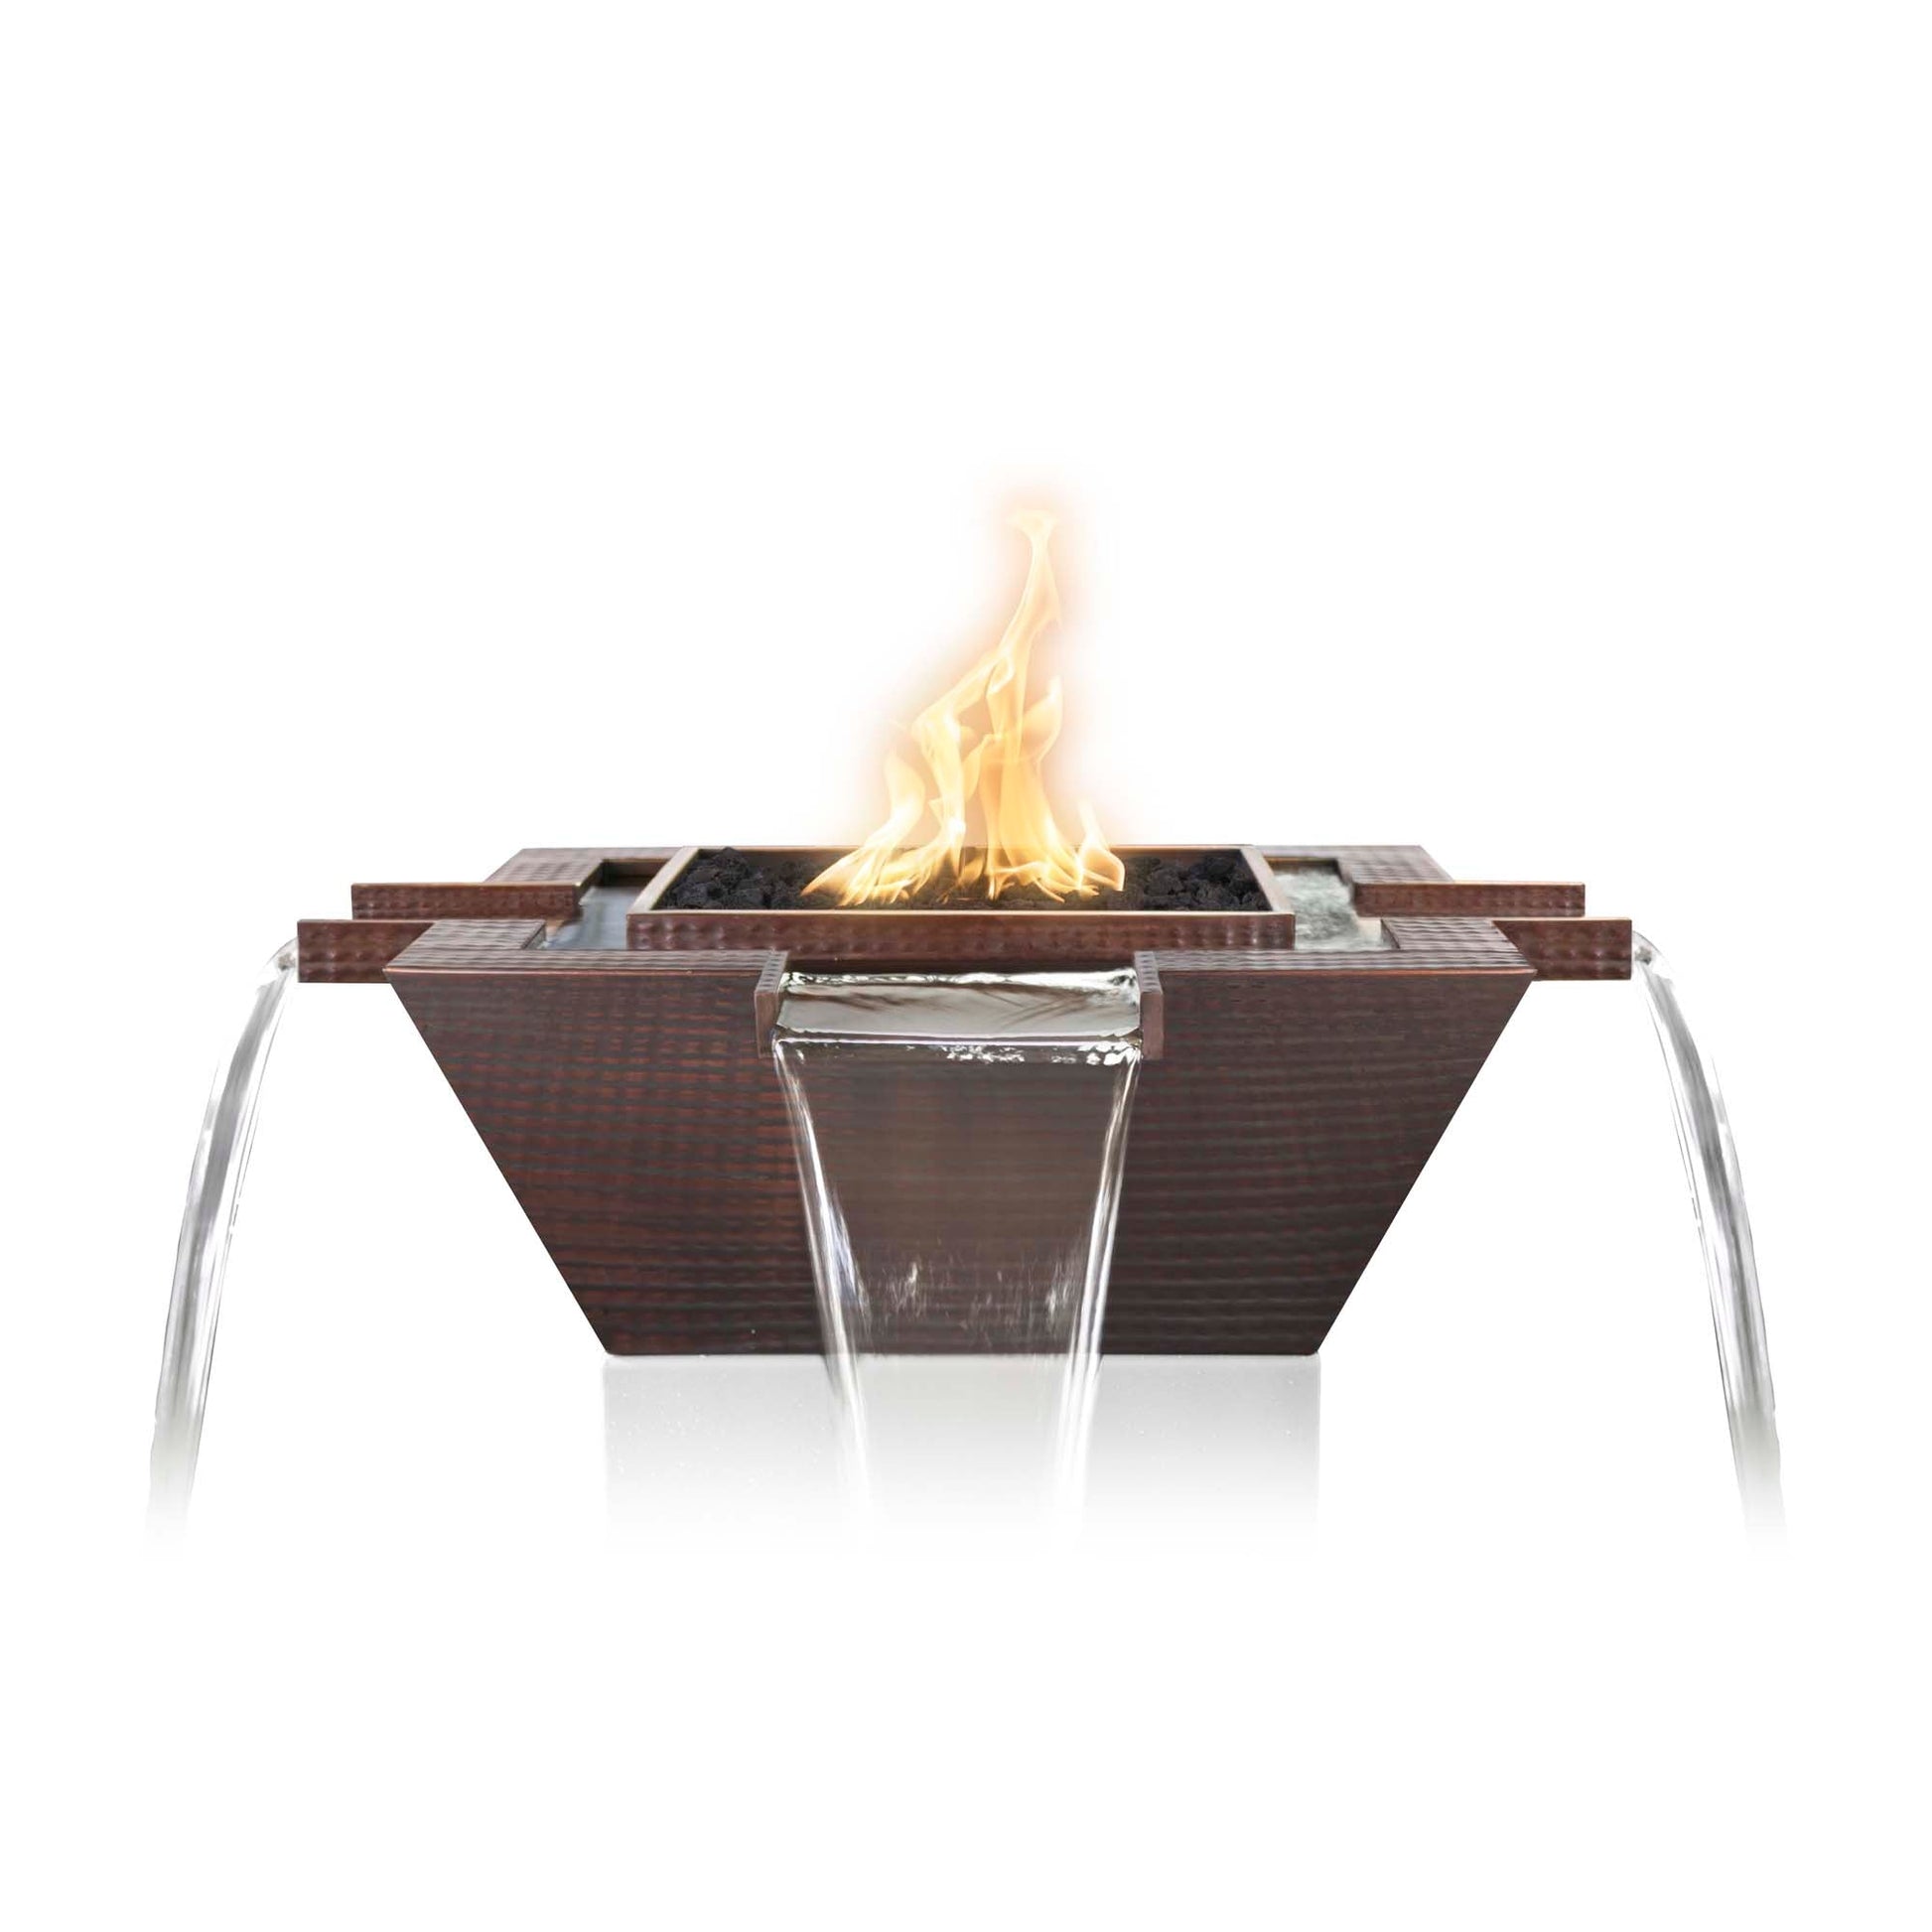 36" Maya Hammered Copper Fire & Water Bowl - 4-Way Spill - 12V Electronic Ignition-Novel Home